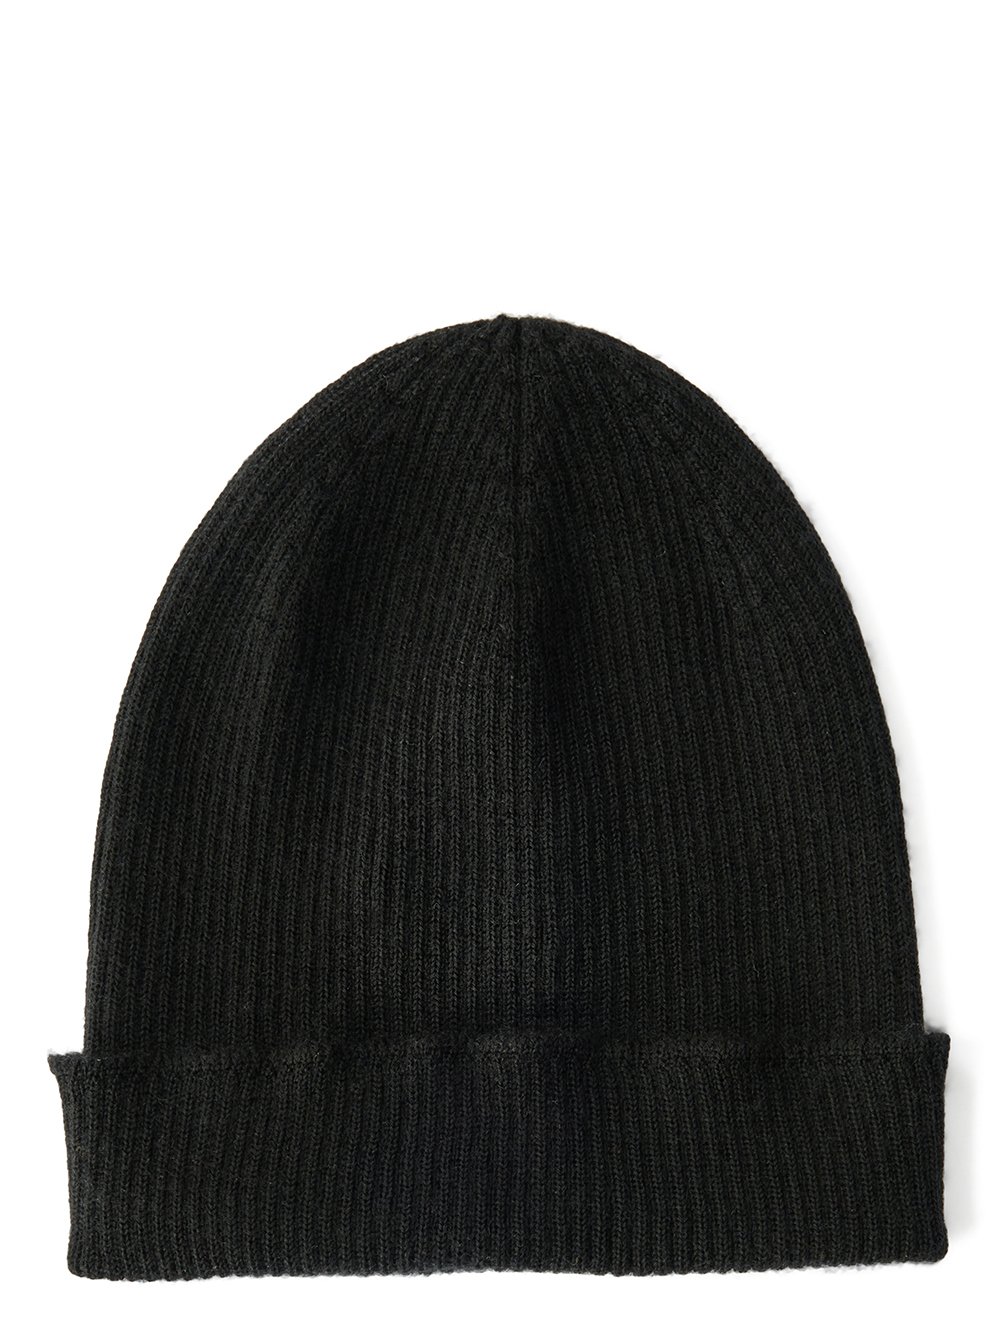 RICK OWENS FW23 LUXOR HAT IN BLACK LIGHTWEIGHT RIBBED KNIT